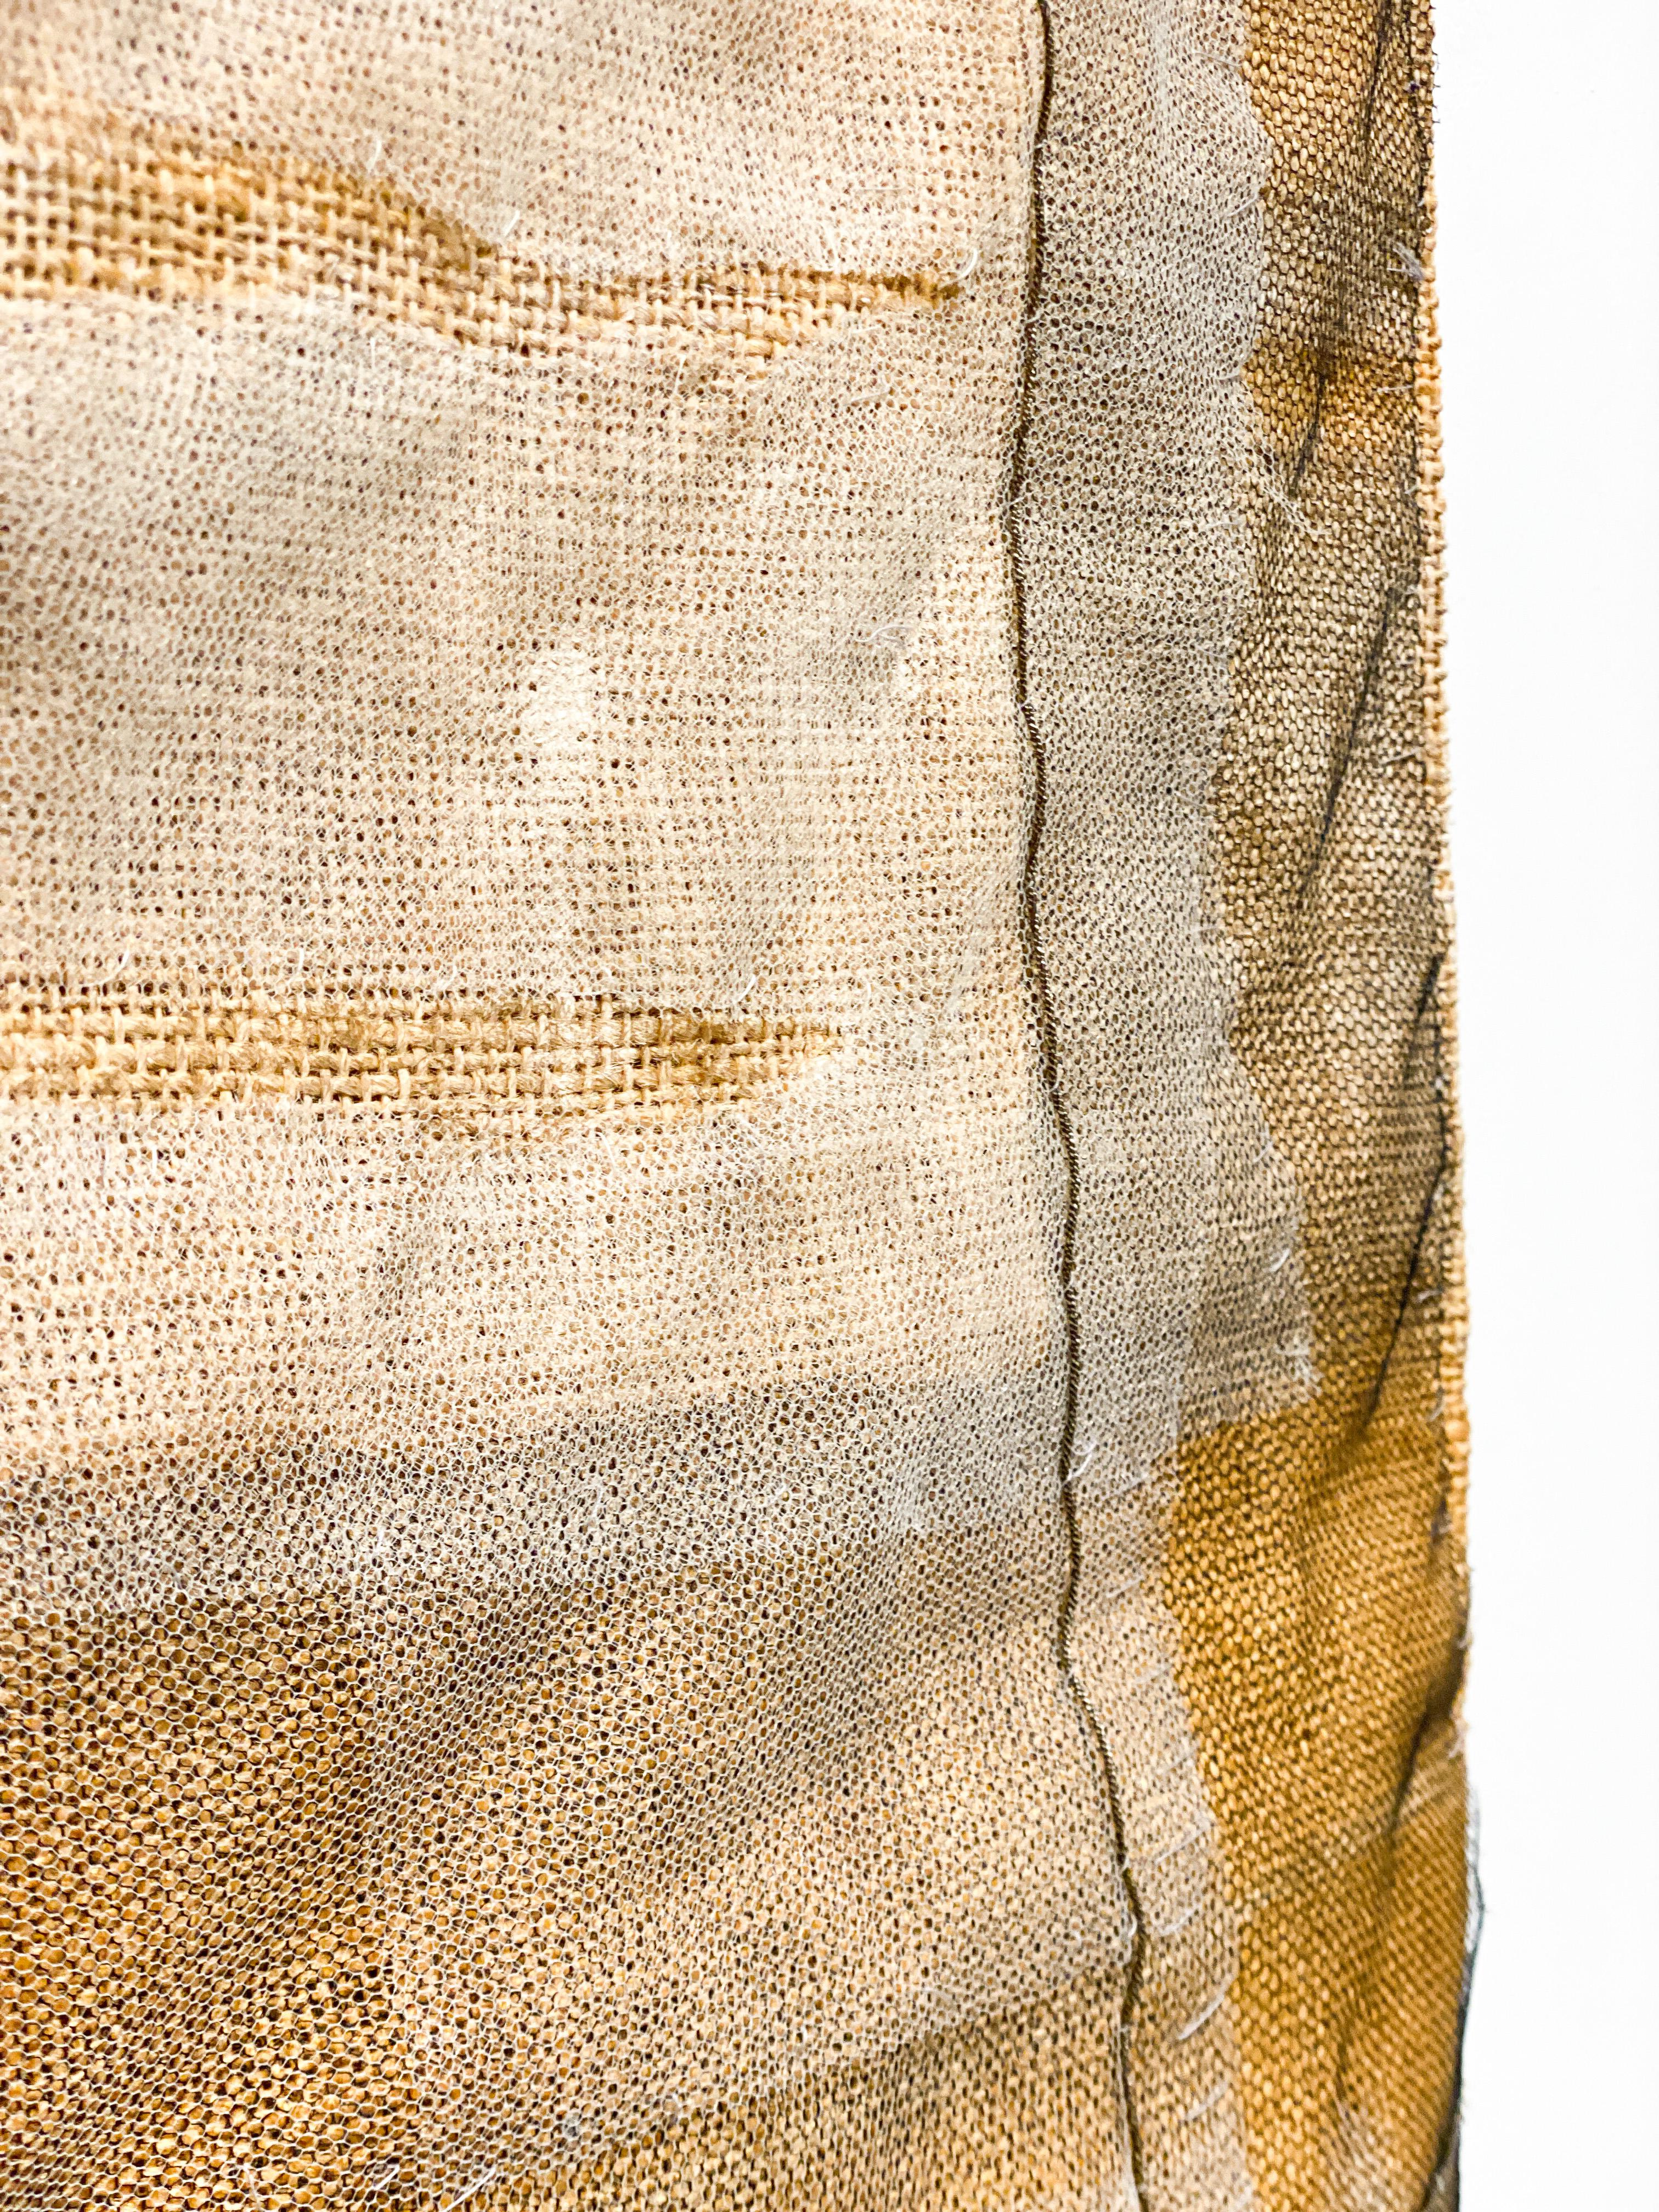 Late 20th Century Brutalist Wall Textile in Earth Tones, Dutch 1960s, Signed & Dated For Sale